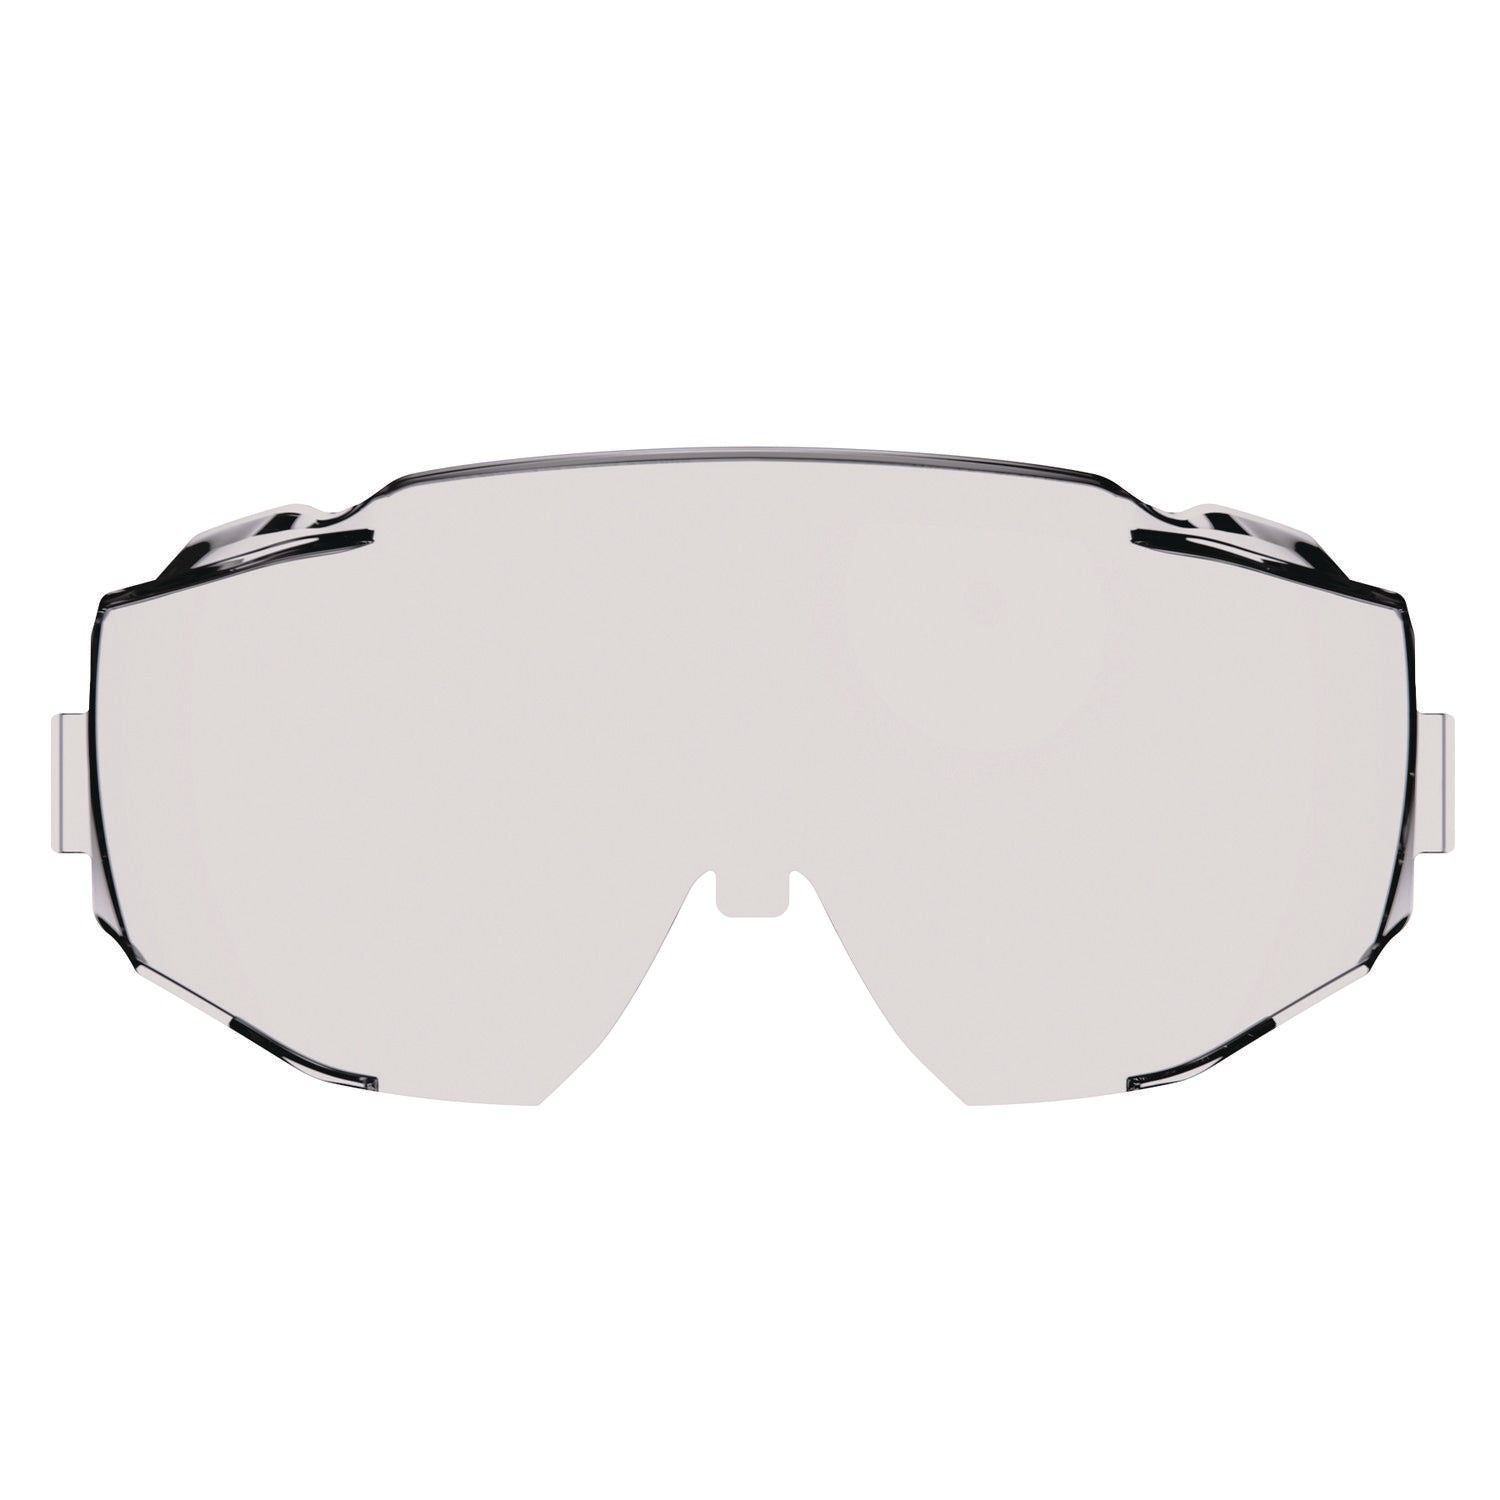 skullerz-modi-otg-anti-scratch-and-enhanced-anti-fog-safety-goggles-replacement-lens-clear-ships-in-1-3-business-days_ego60304 - 1